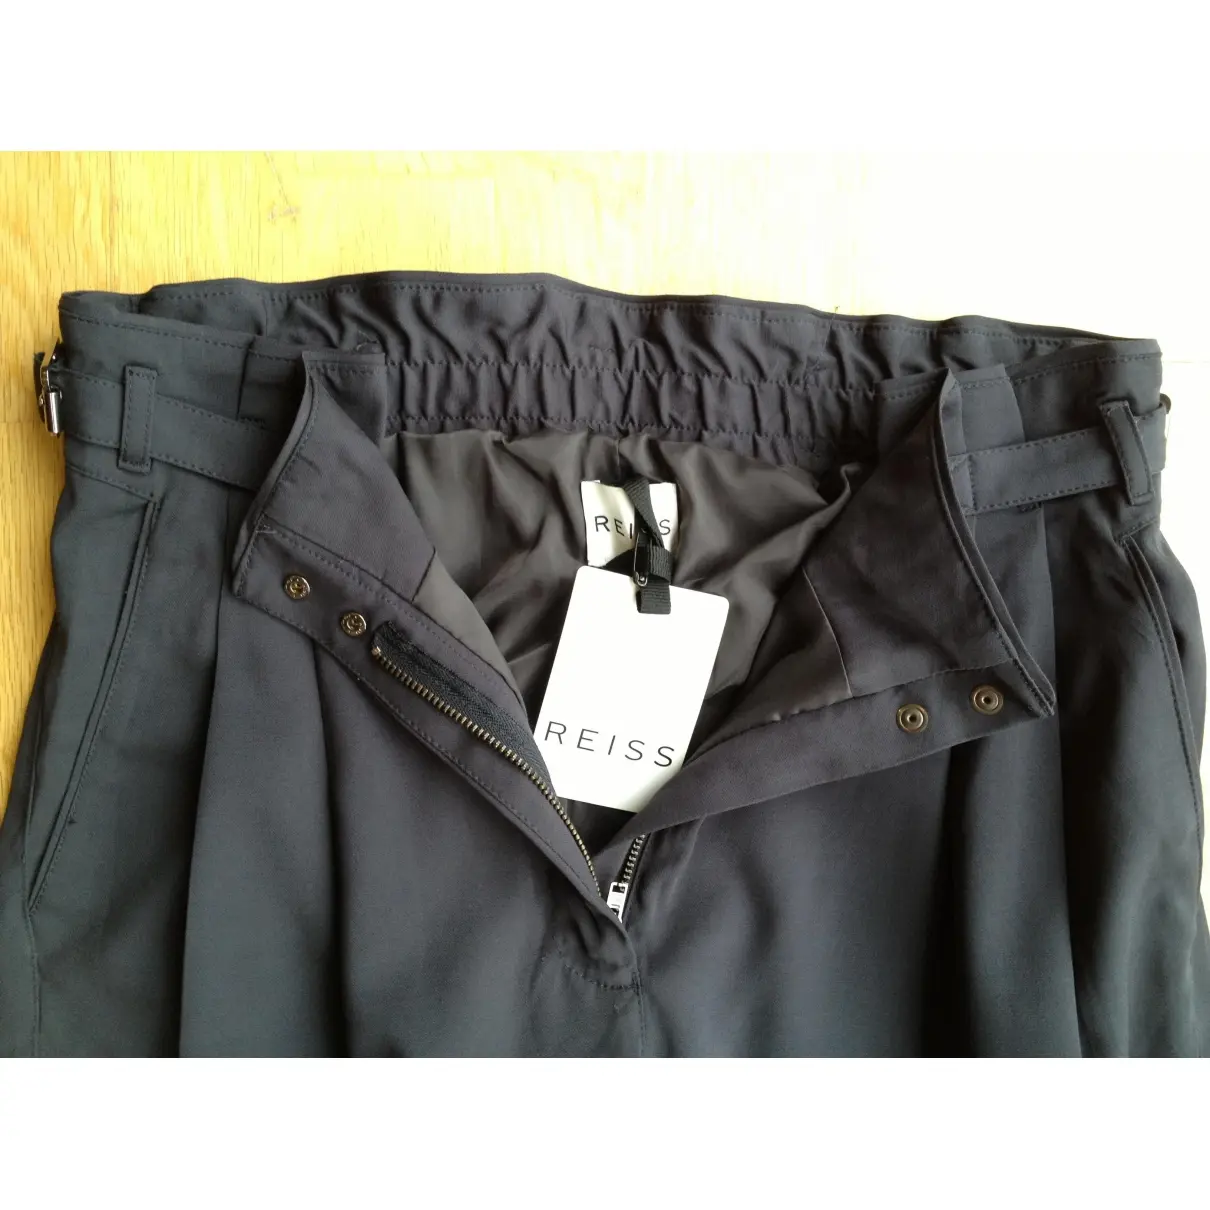 Reiss Grey Viscose Trousers for sale